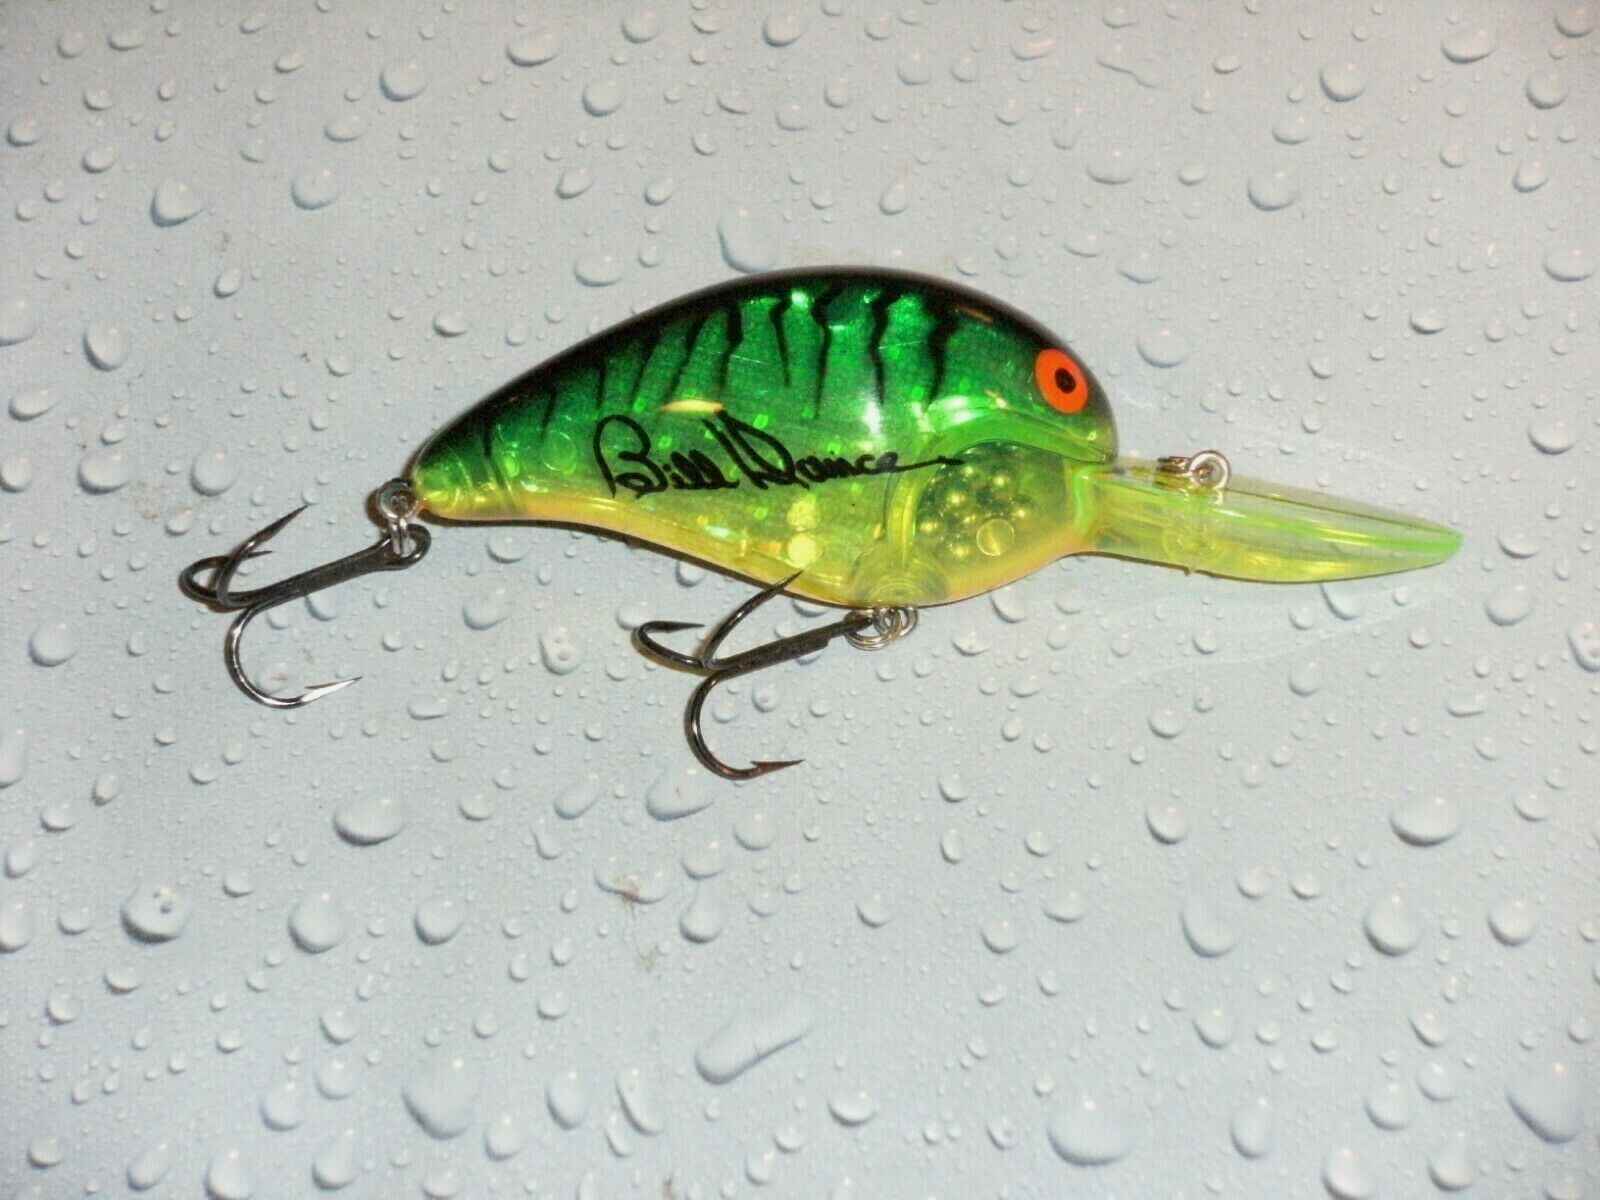 OLD REBEL V 10-15 CRANKBAIT LURE WITH G FINISH NIP HAS PAINT LOSS ON 1 SIDE